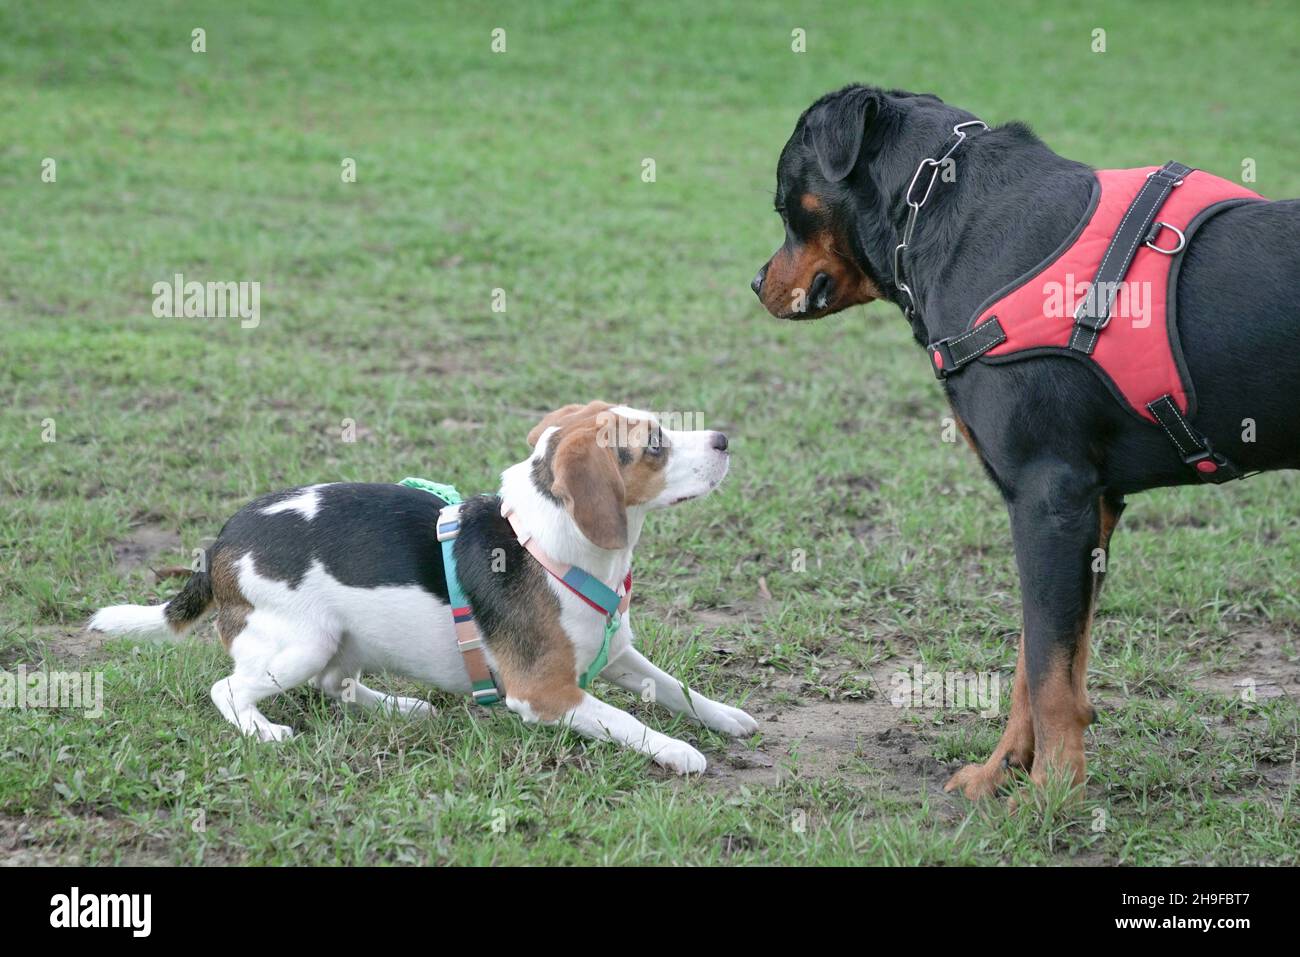 One large and another small breed dog getting to know each other at the dog park. Stock Photo